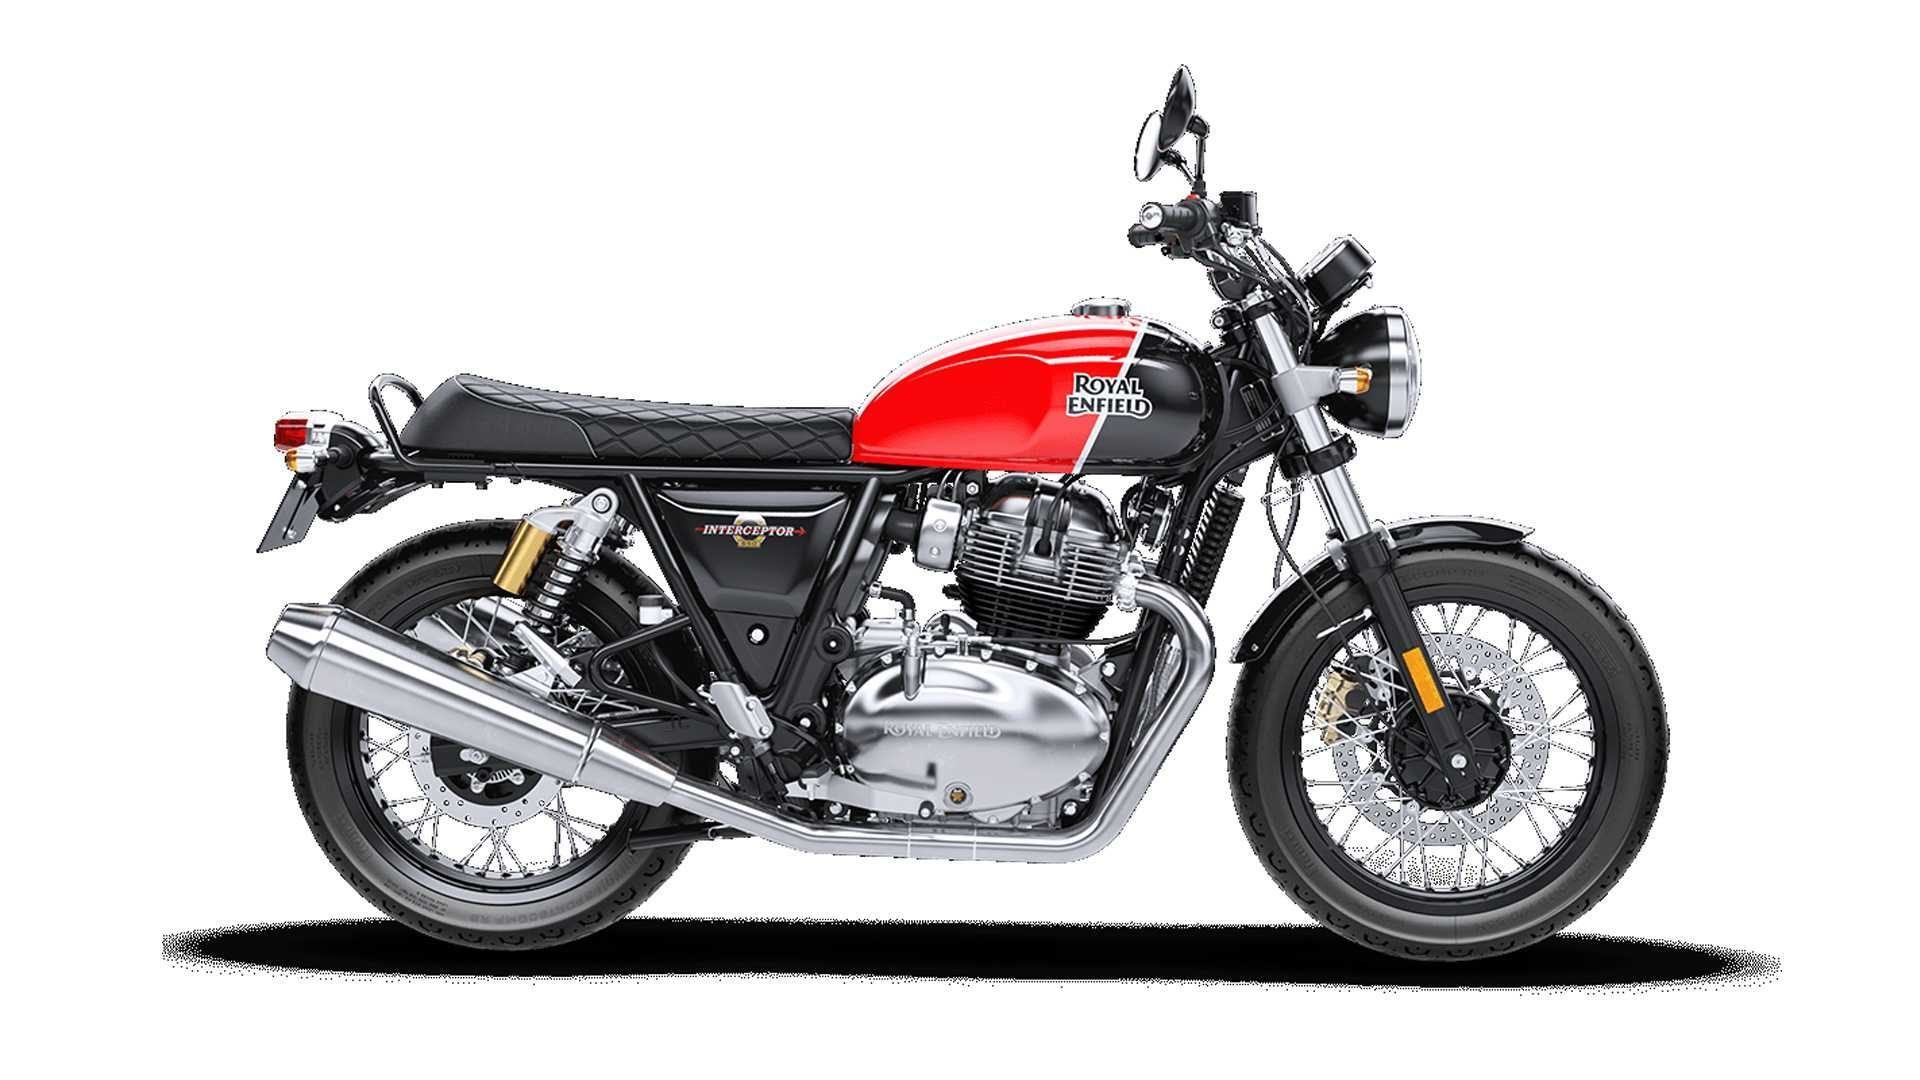 Royal Enfield Recalls Motorcycles for Brake Issue